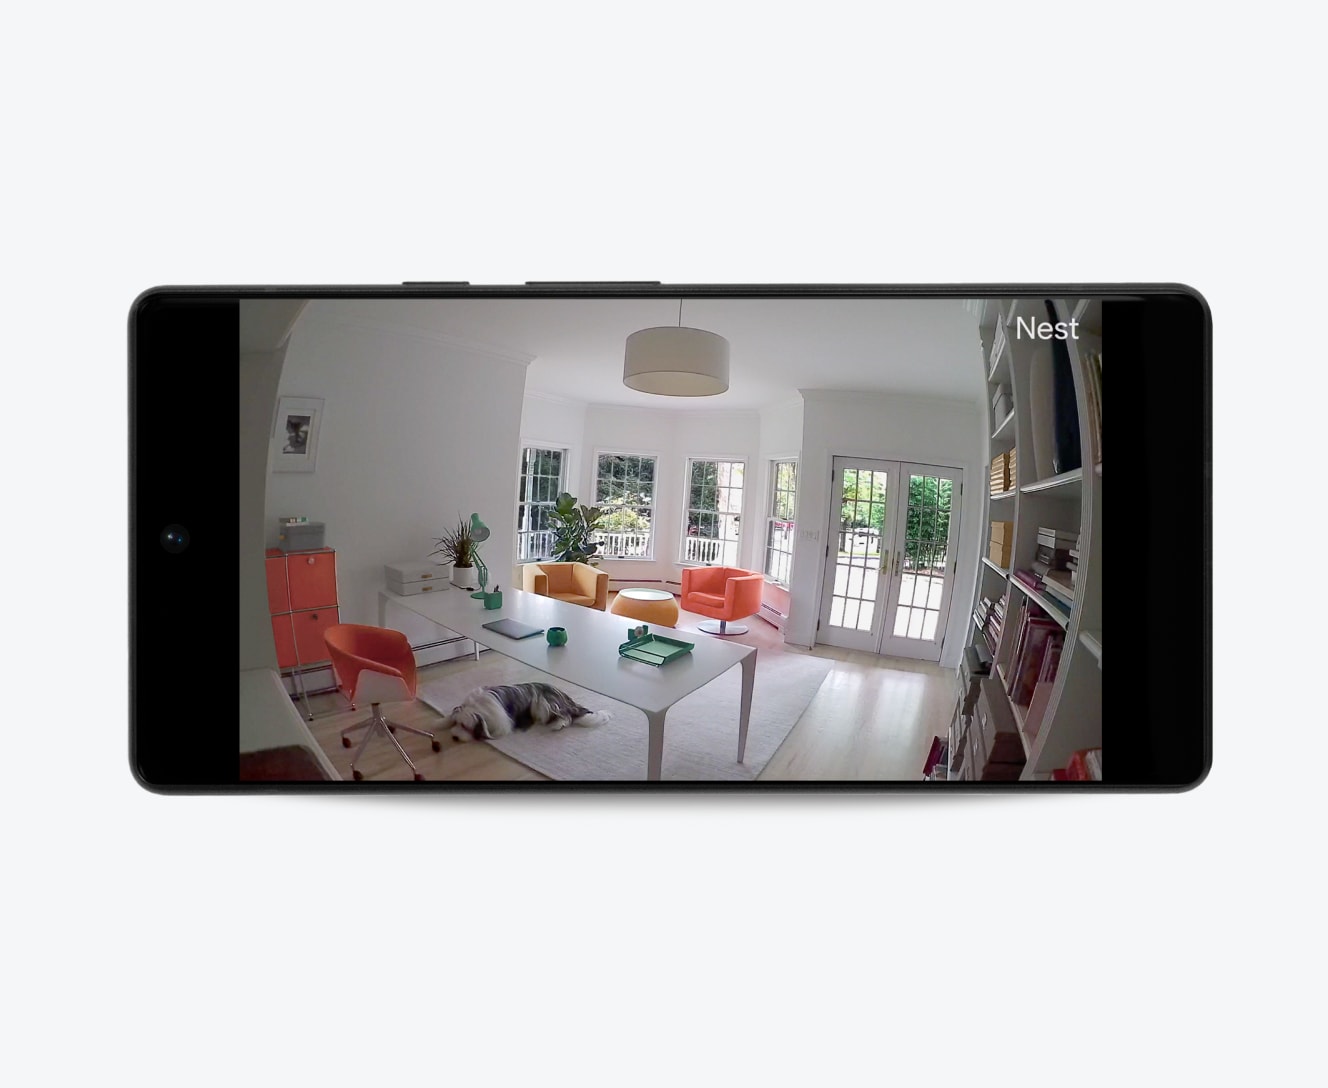 Google indoor camera next to a cellphone with live surveillance footage 